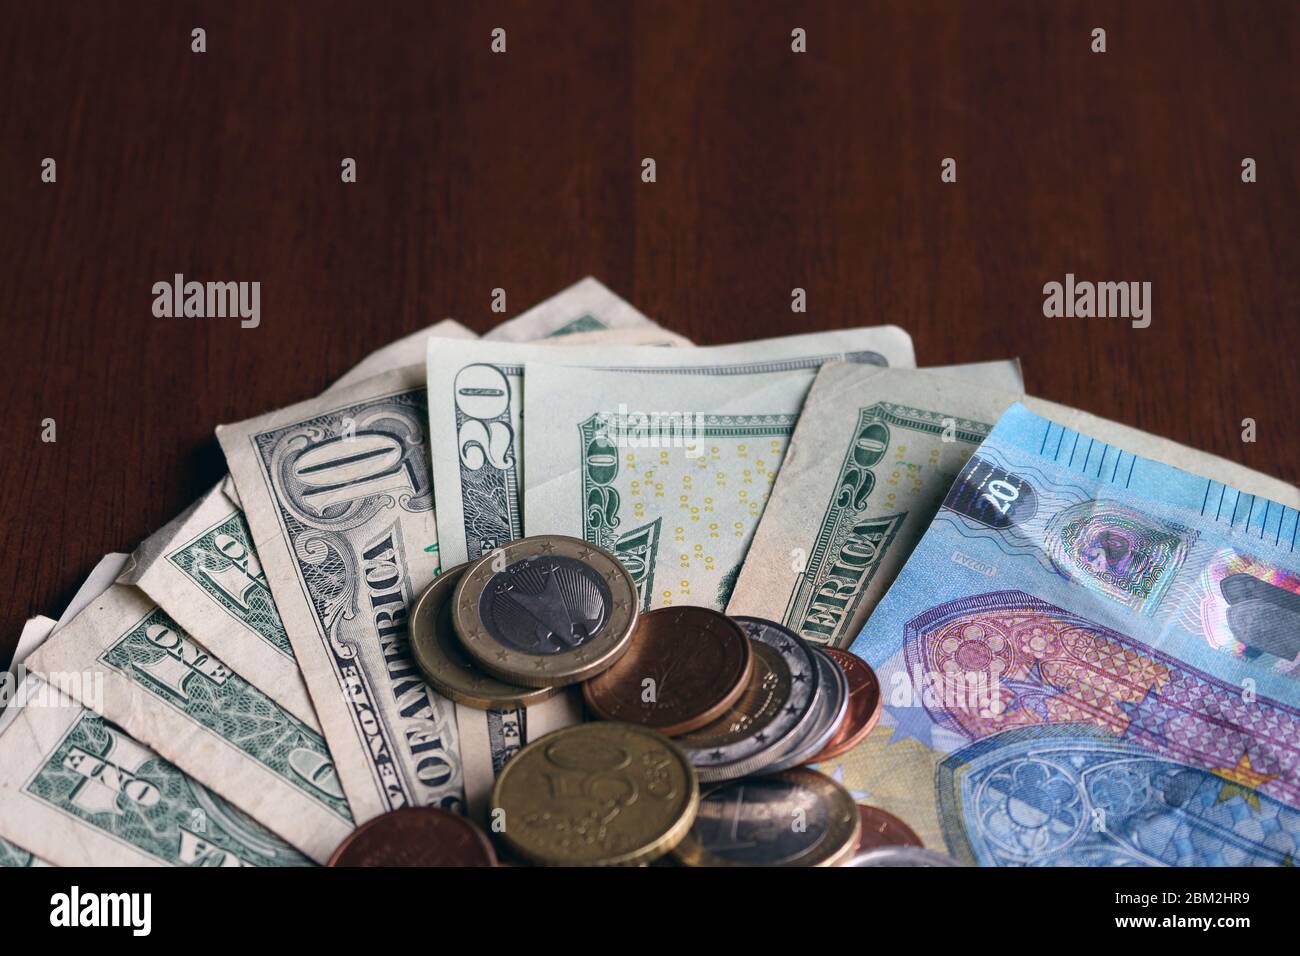 Money - after Covid-19 how will the circulation of coins Stock Photo